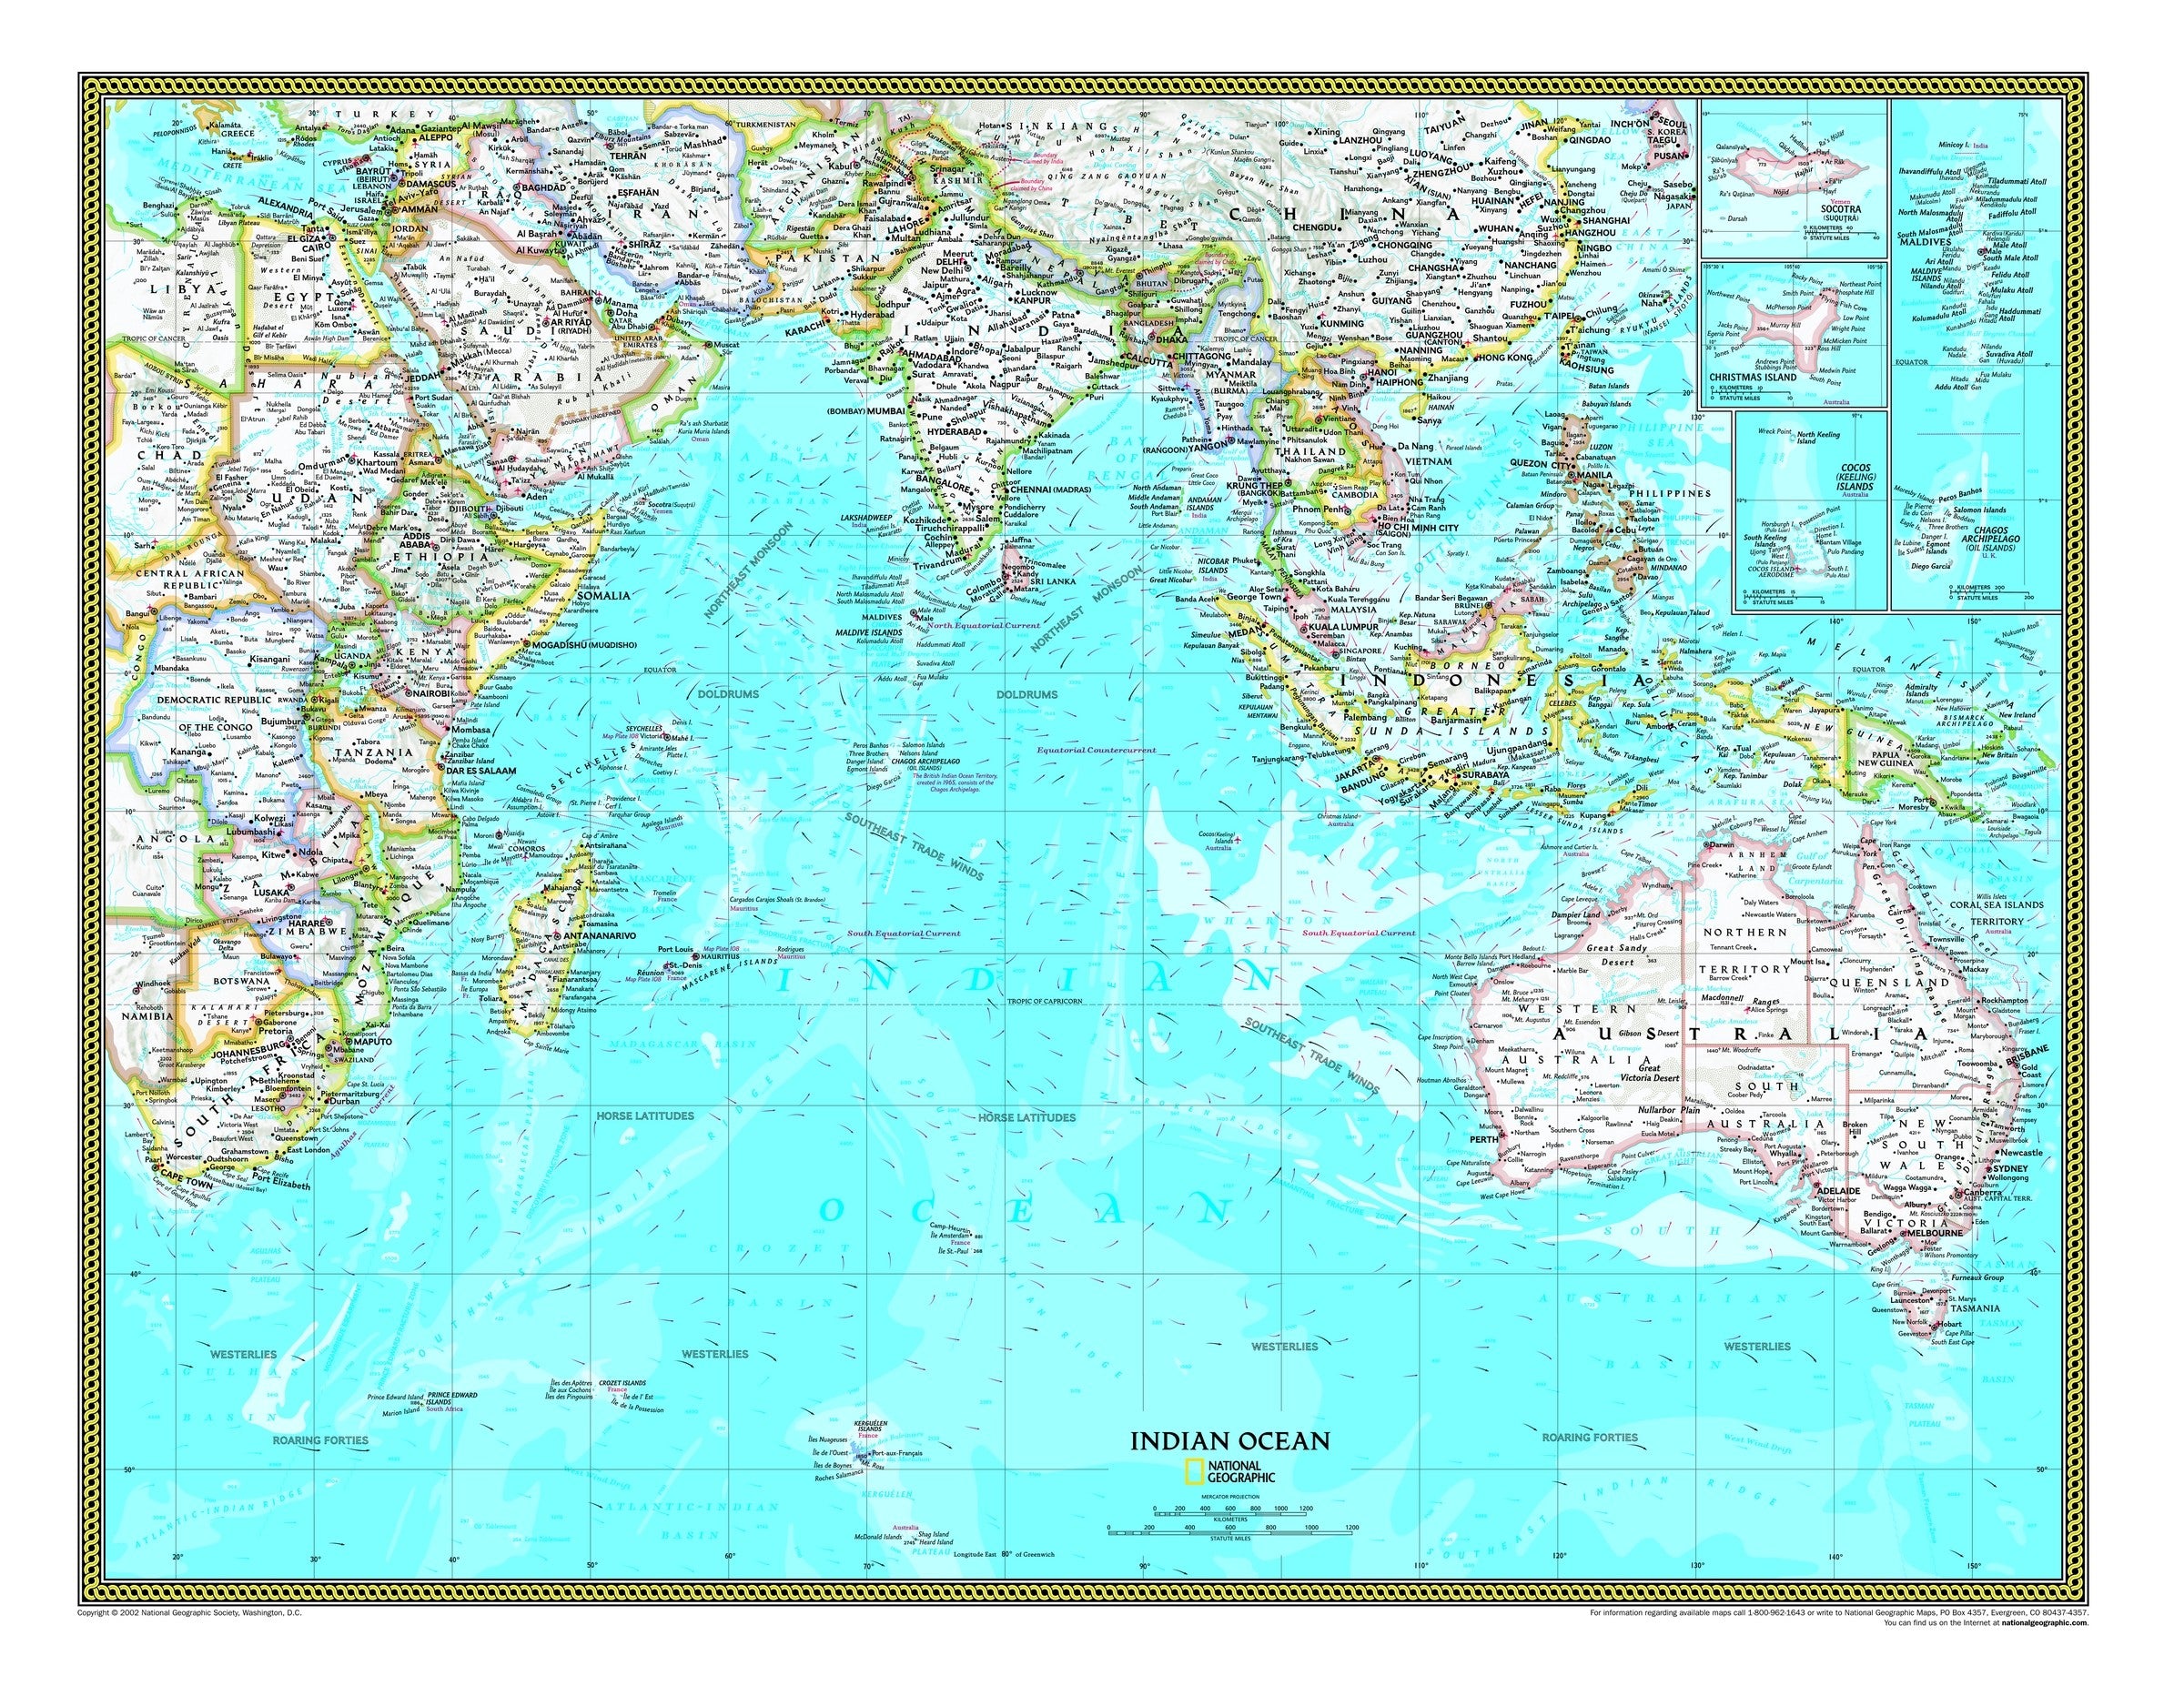 The Indian Ocean Map 7793